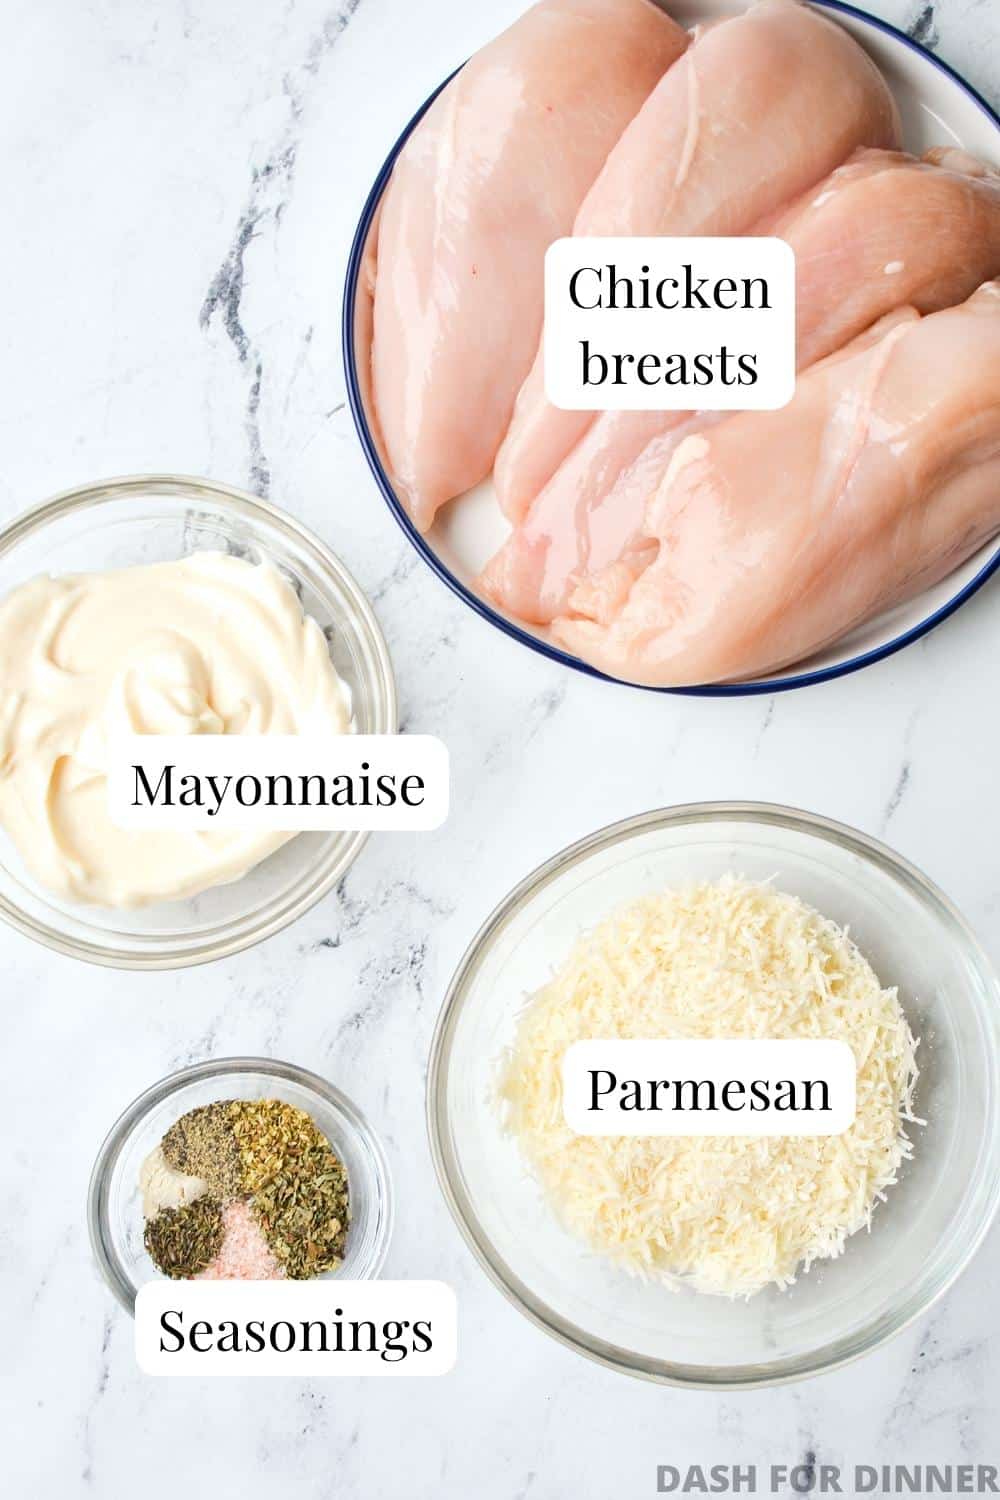 The ingredients needed to make Mayo Parmesan Chicken: chicken breasts, mayonnaise, herbs and seasonings, and parmesan cheese.